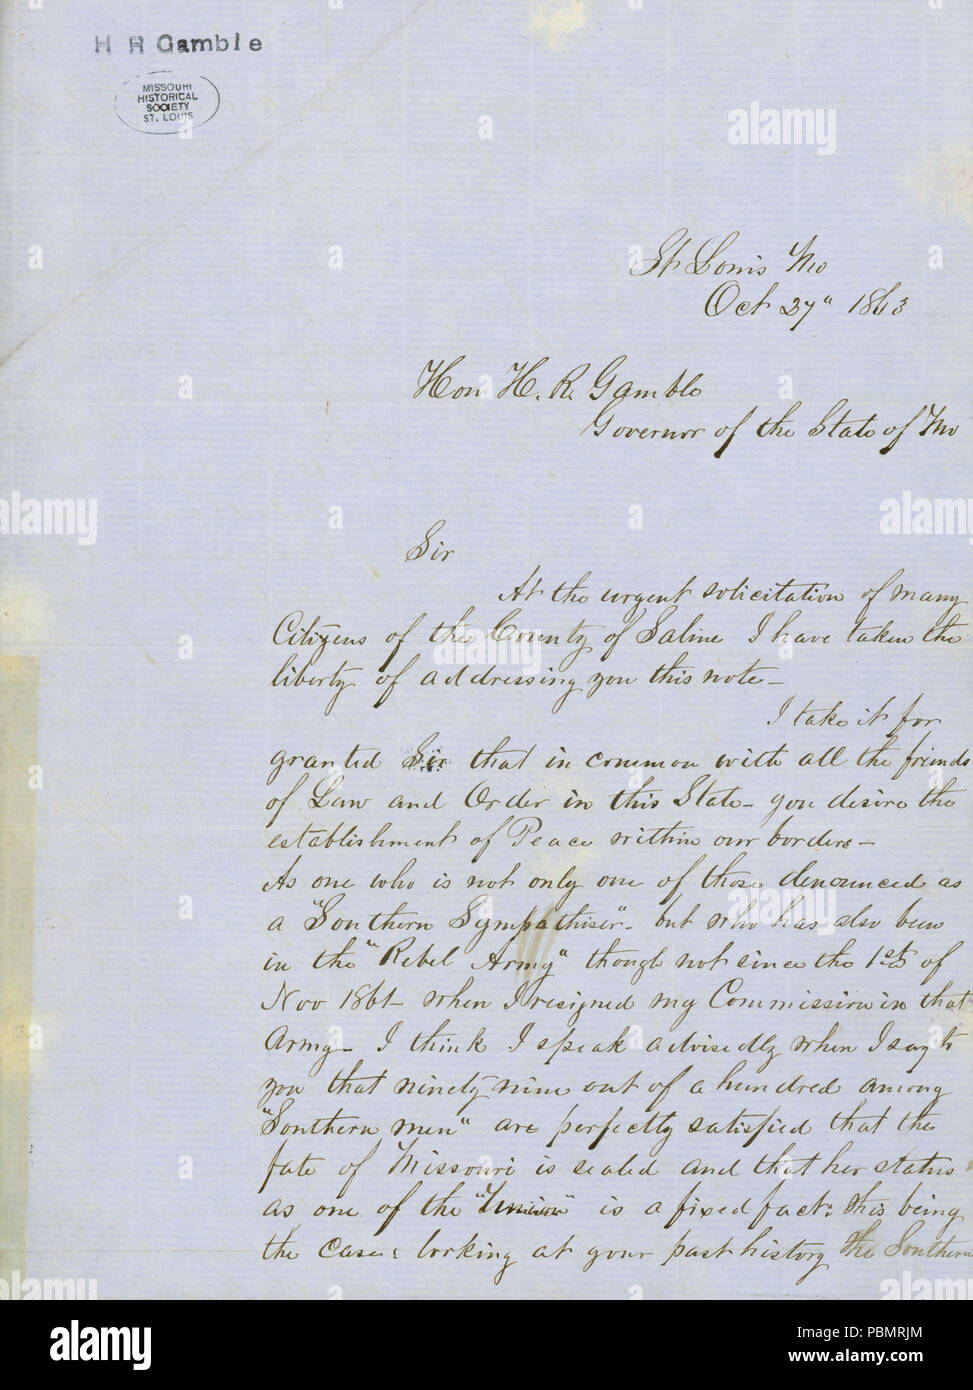 910 Letter signed John Sheridan, St. Louis, Mo., to Hon. H.R. Gamble, Governor of the State of Mo., October 27, 1863 Stock Photo